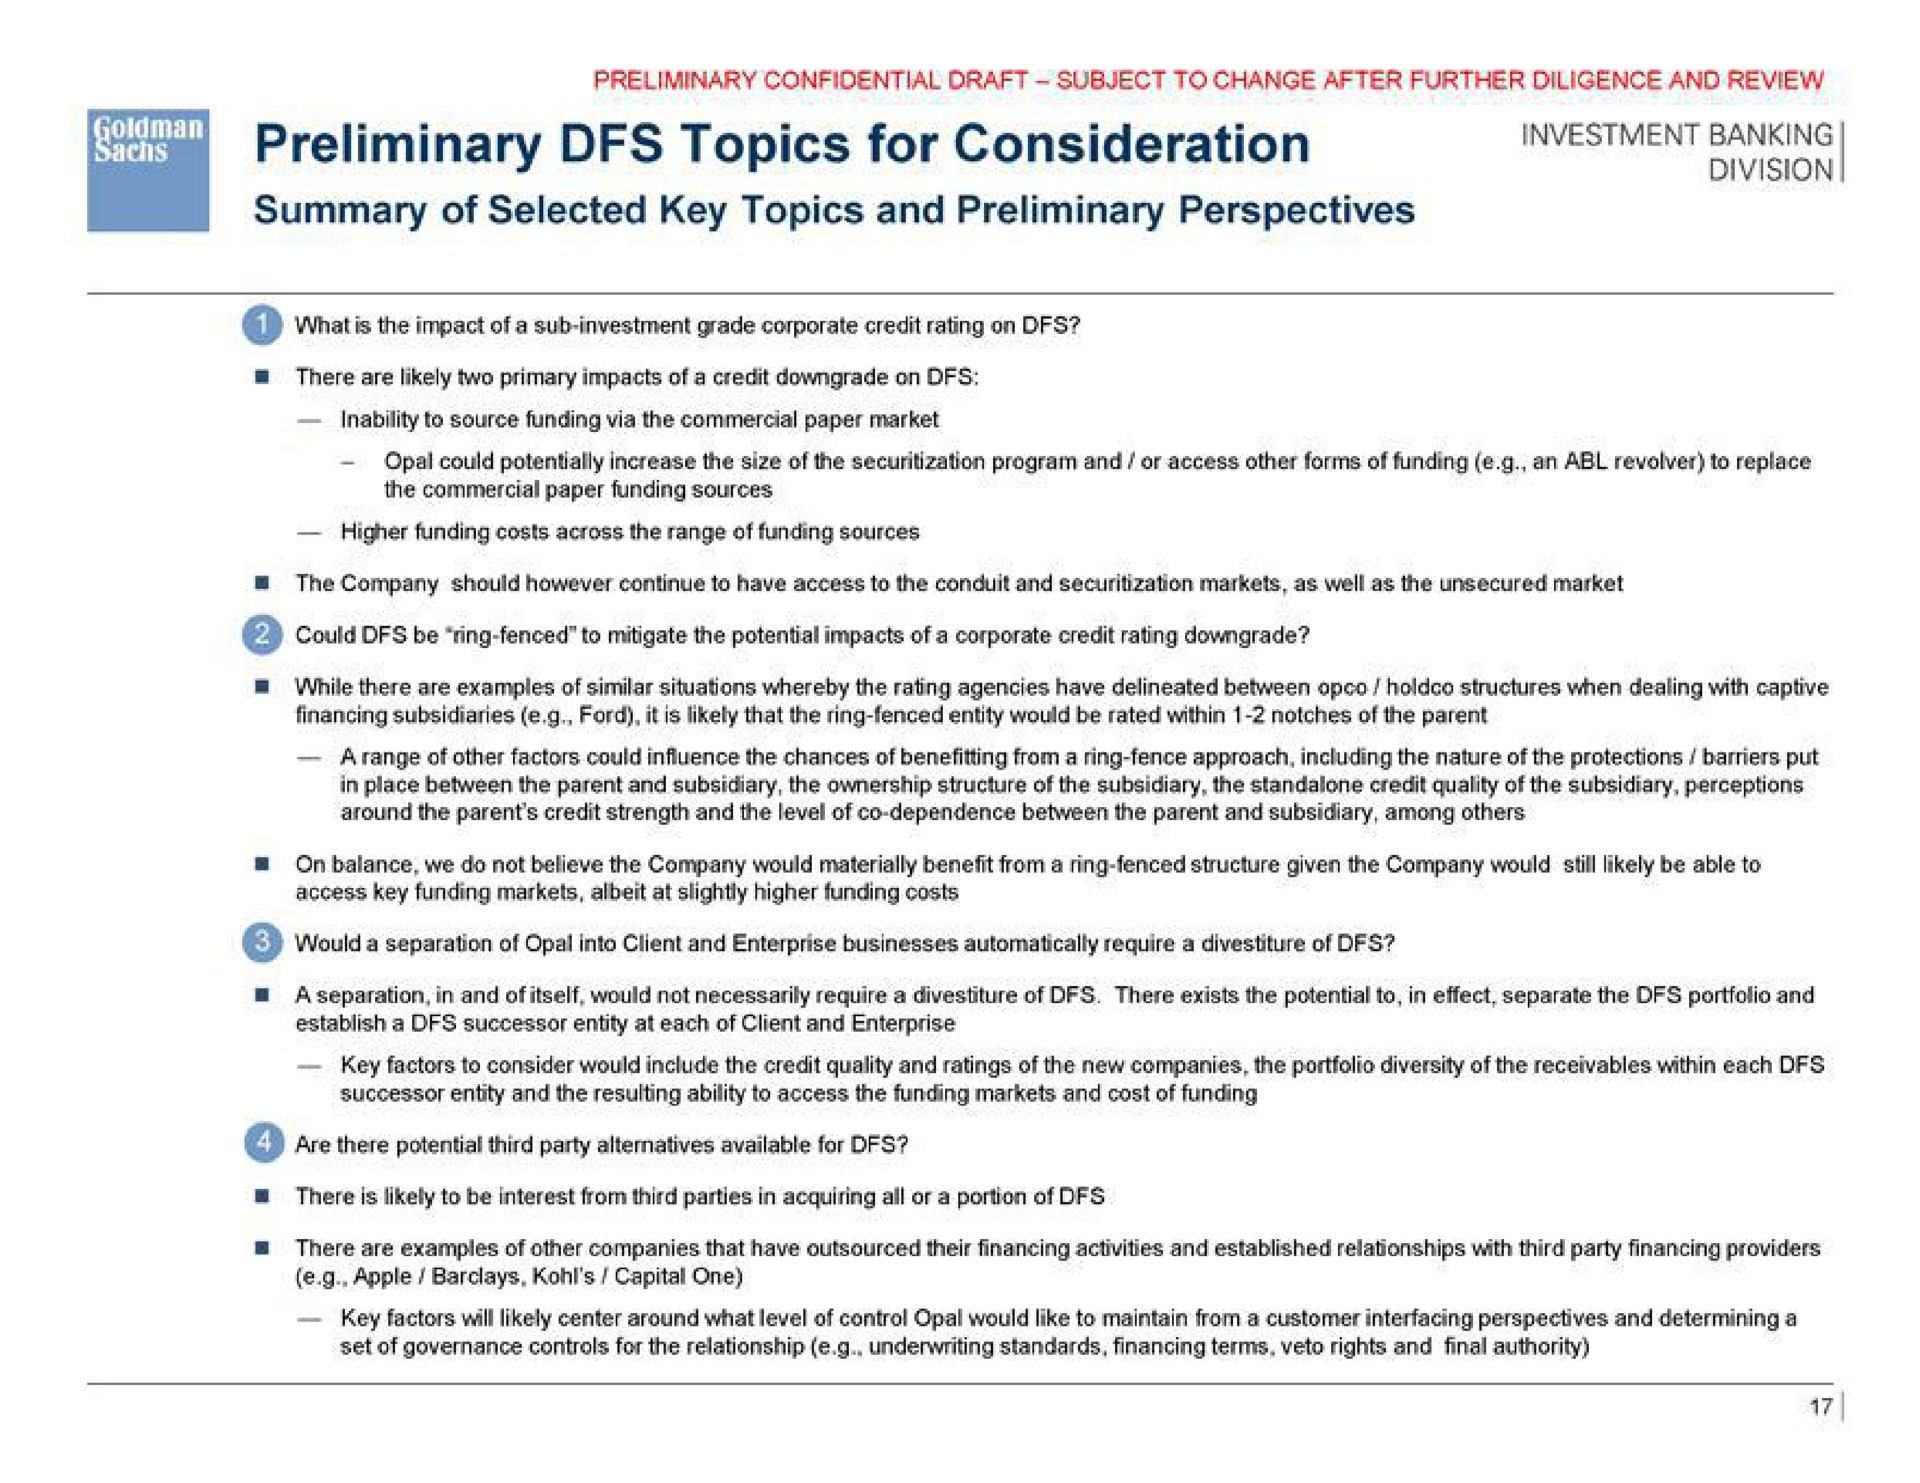 preliminary topics for consideration summary of selected key topics and preliminary perspectives | Goldman Sachs